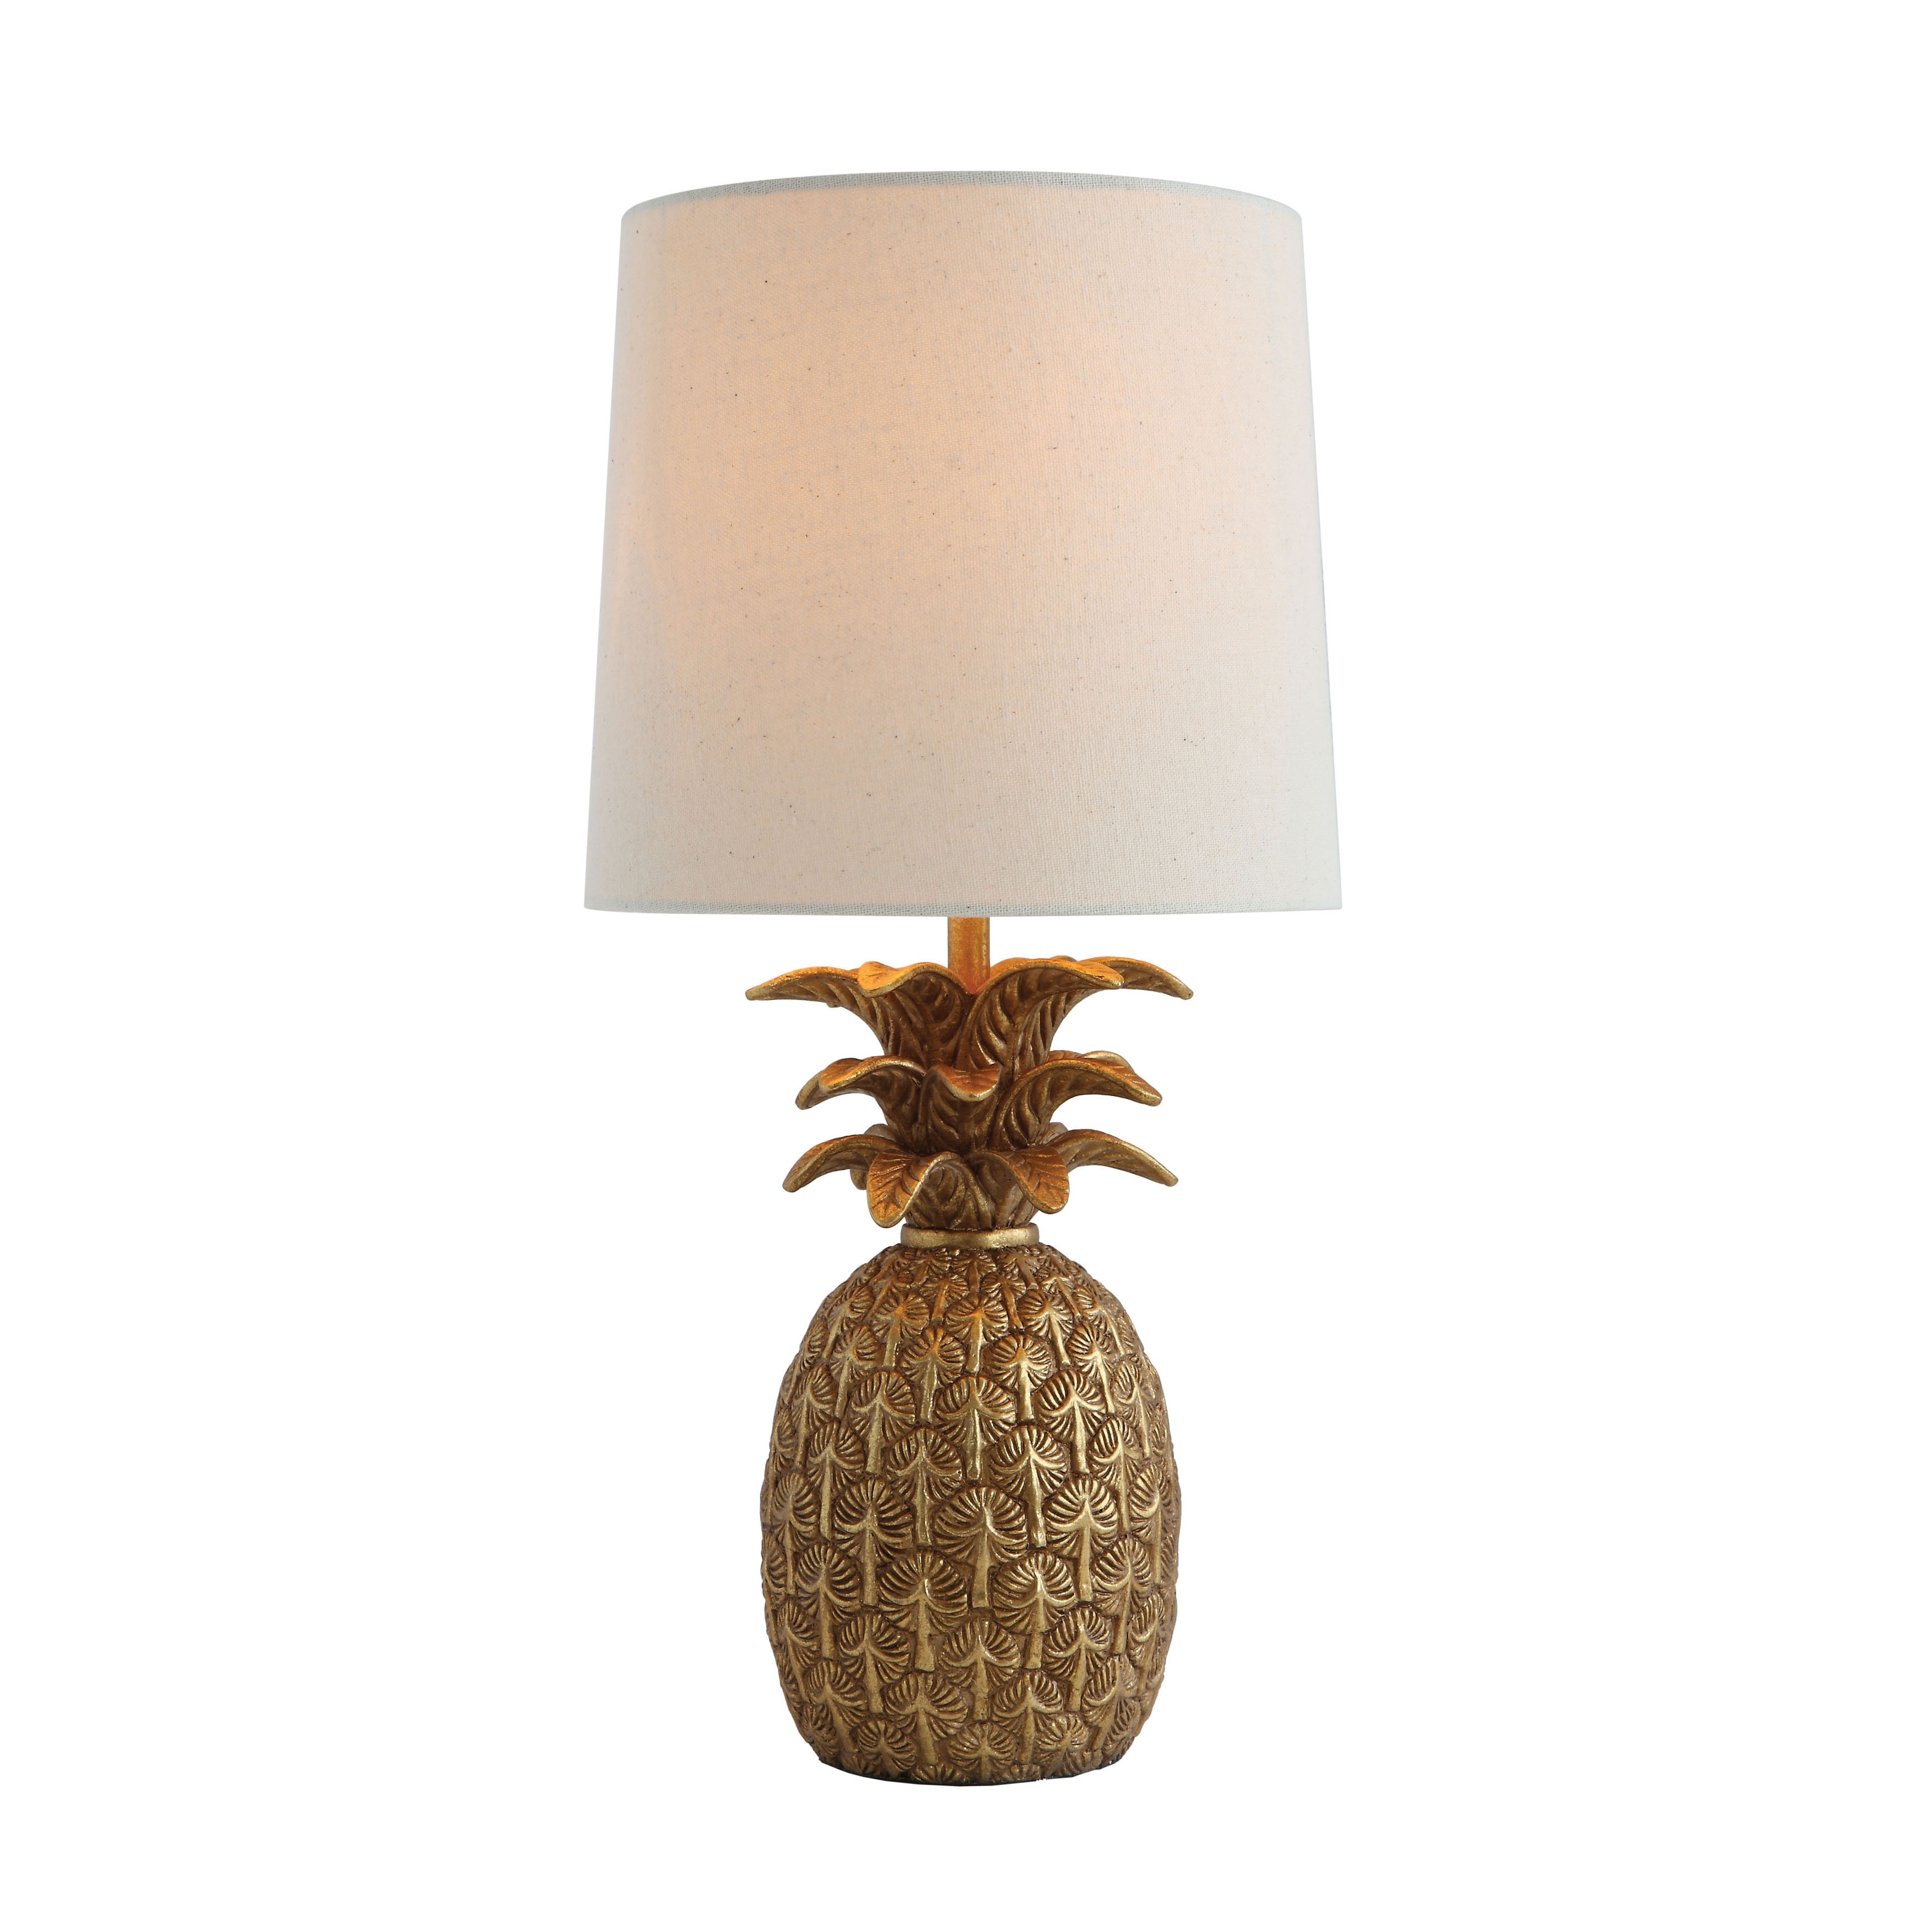 Storied Home Table Lamps - Bed Bath & Beyond